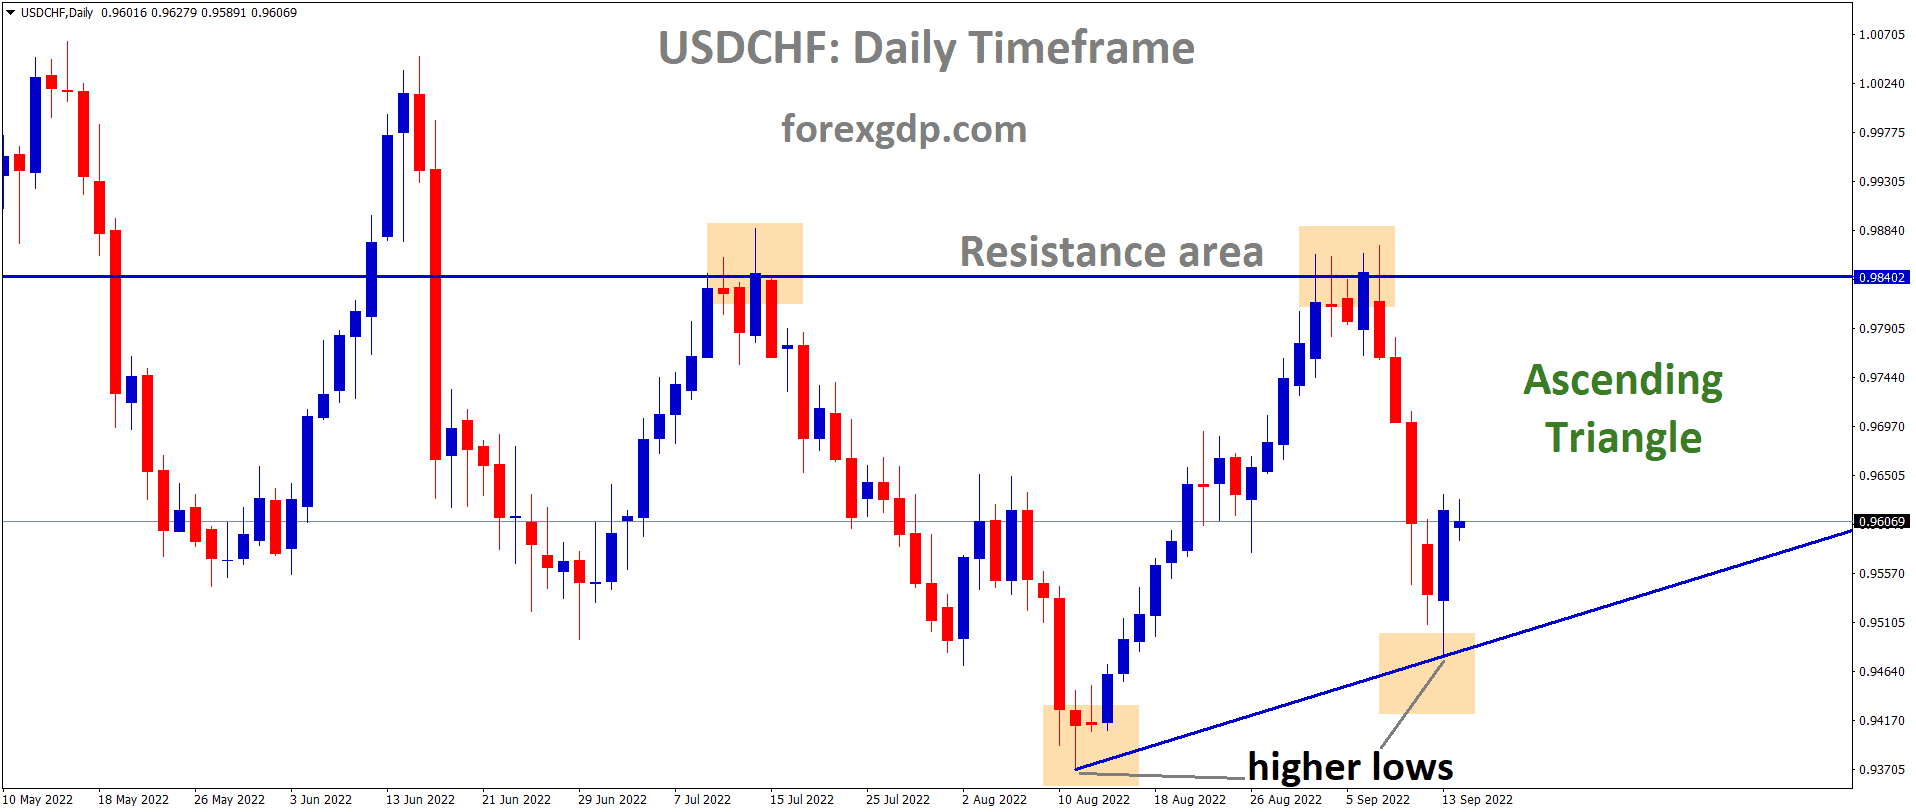 USDCHF is moving in an Ascending Triangle pattern and the market has rebounded from the higher low area of the Pattern.